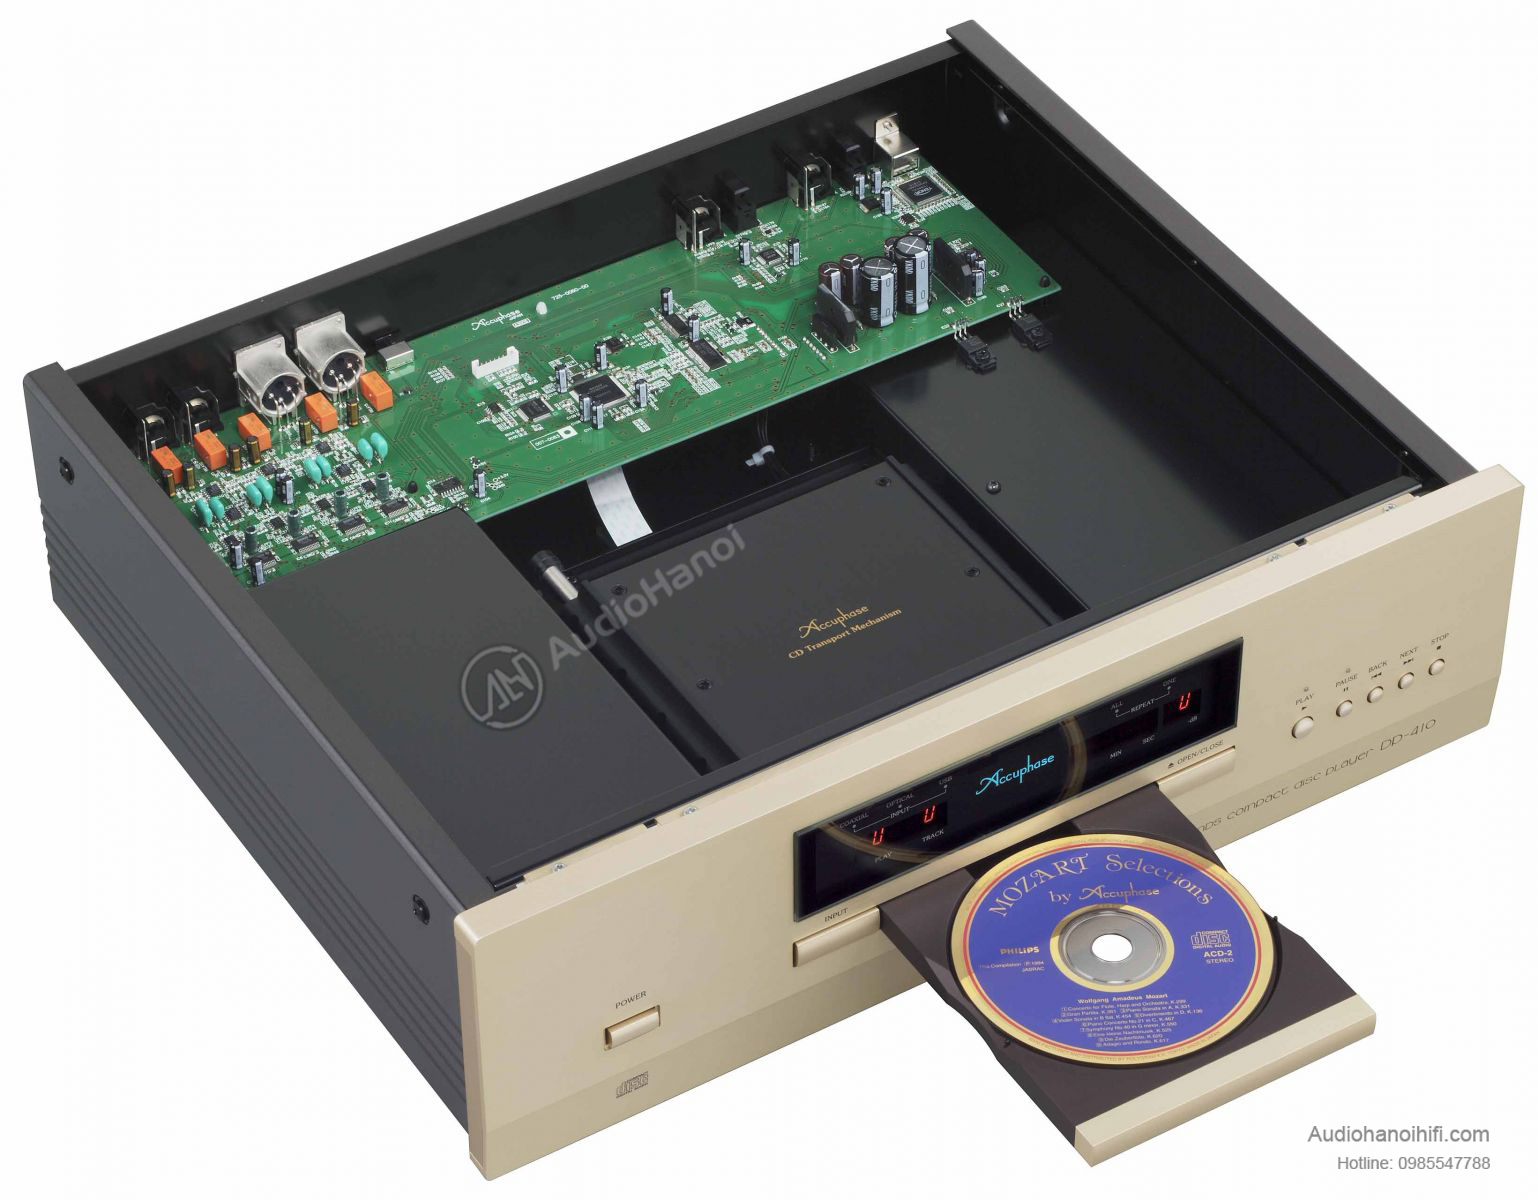 dau CD Accuphase DP-410 chat luong